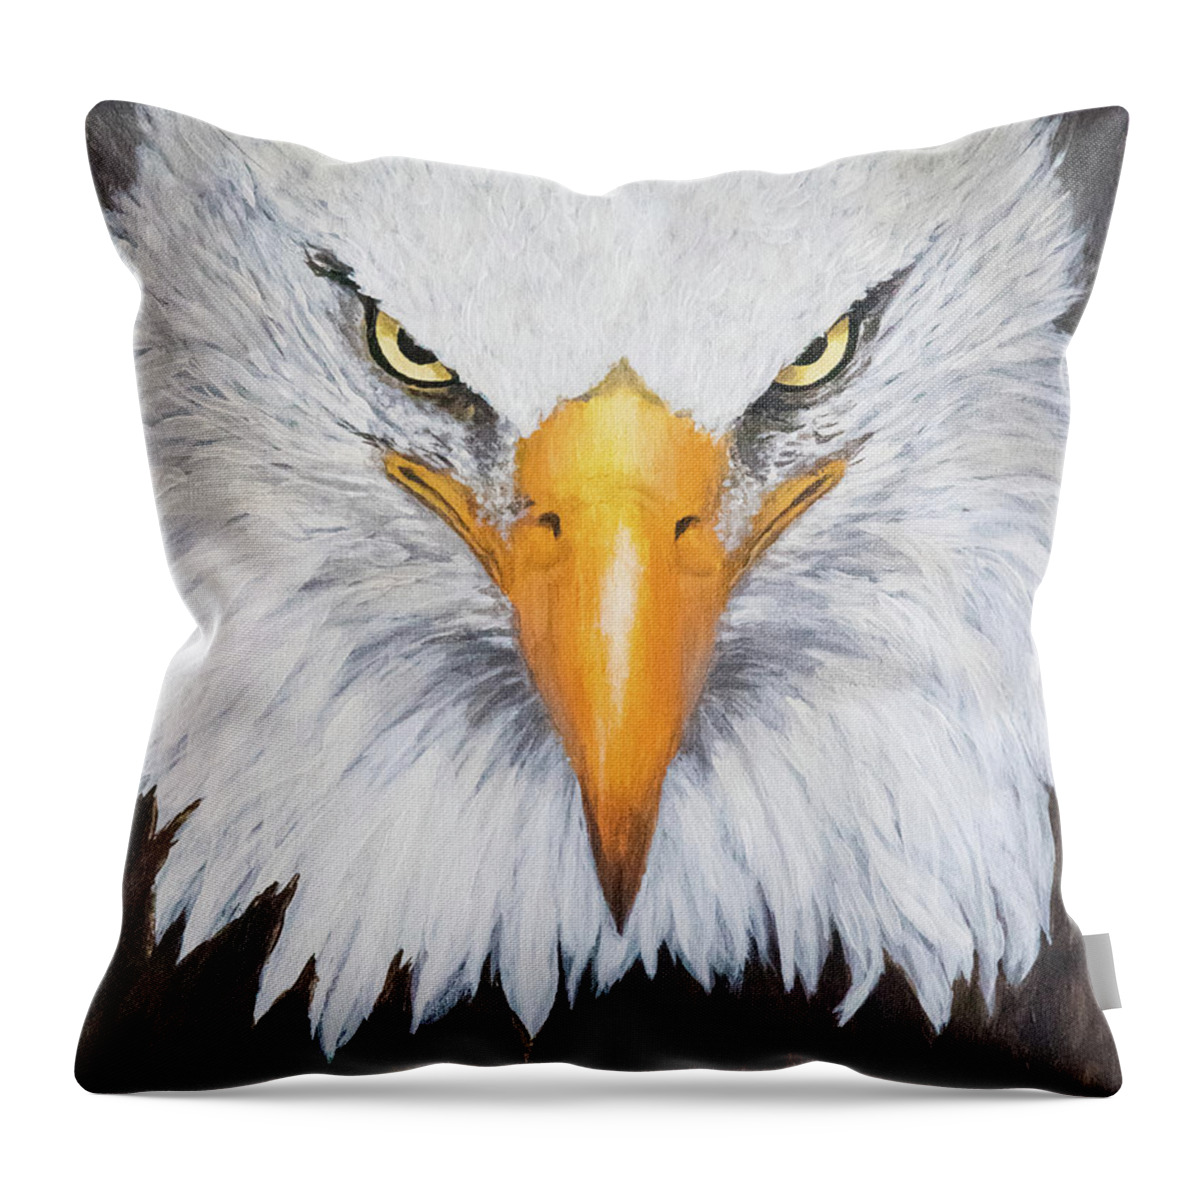 Nature Throw Pillow featuring the painting Bald Eagle #2 by Linda Shannon Morgan